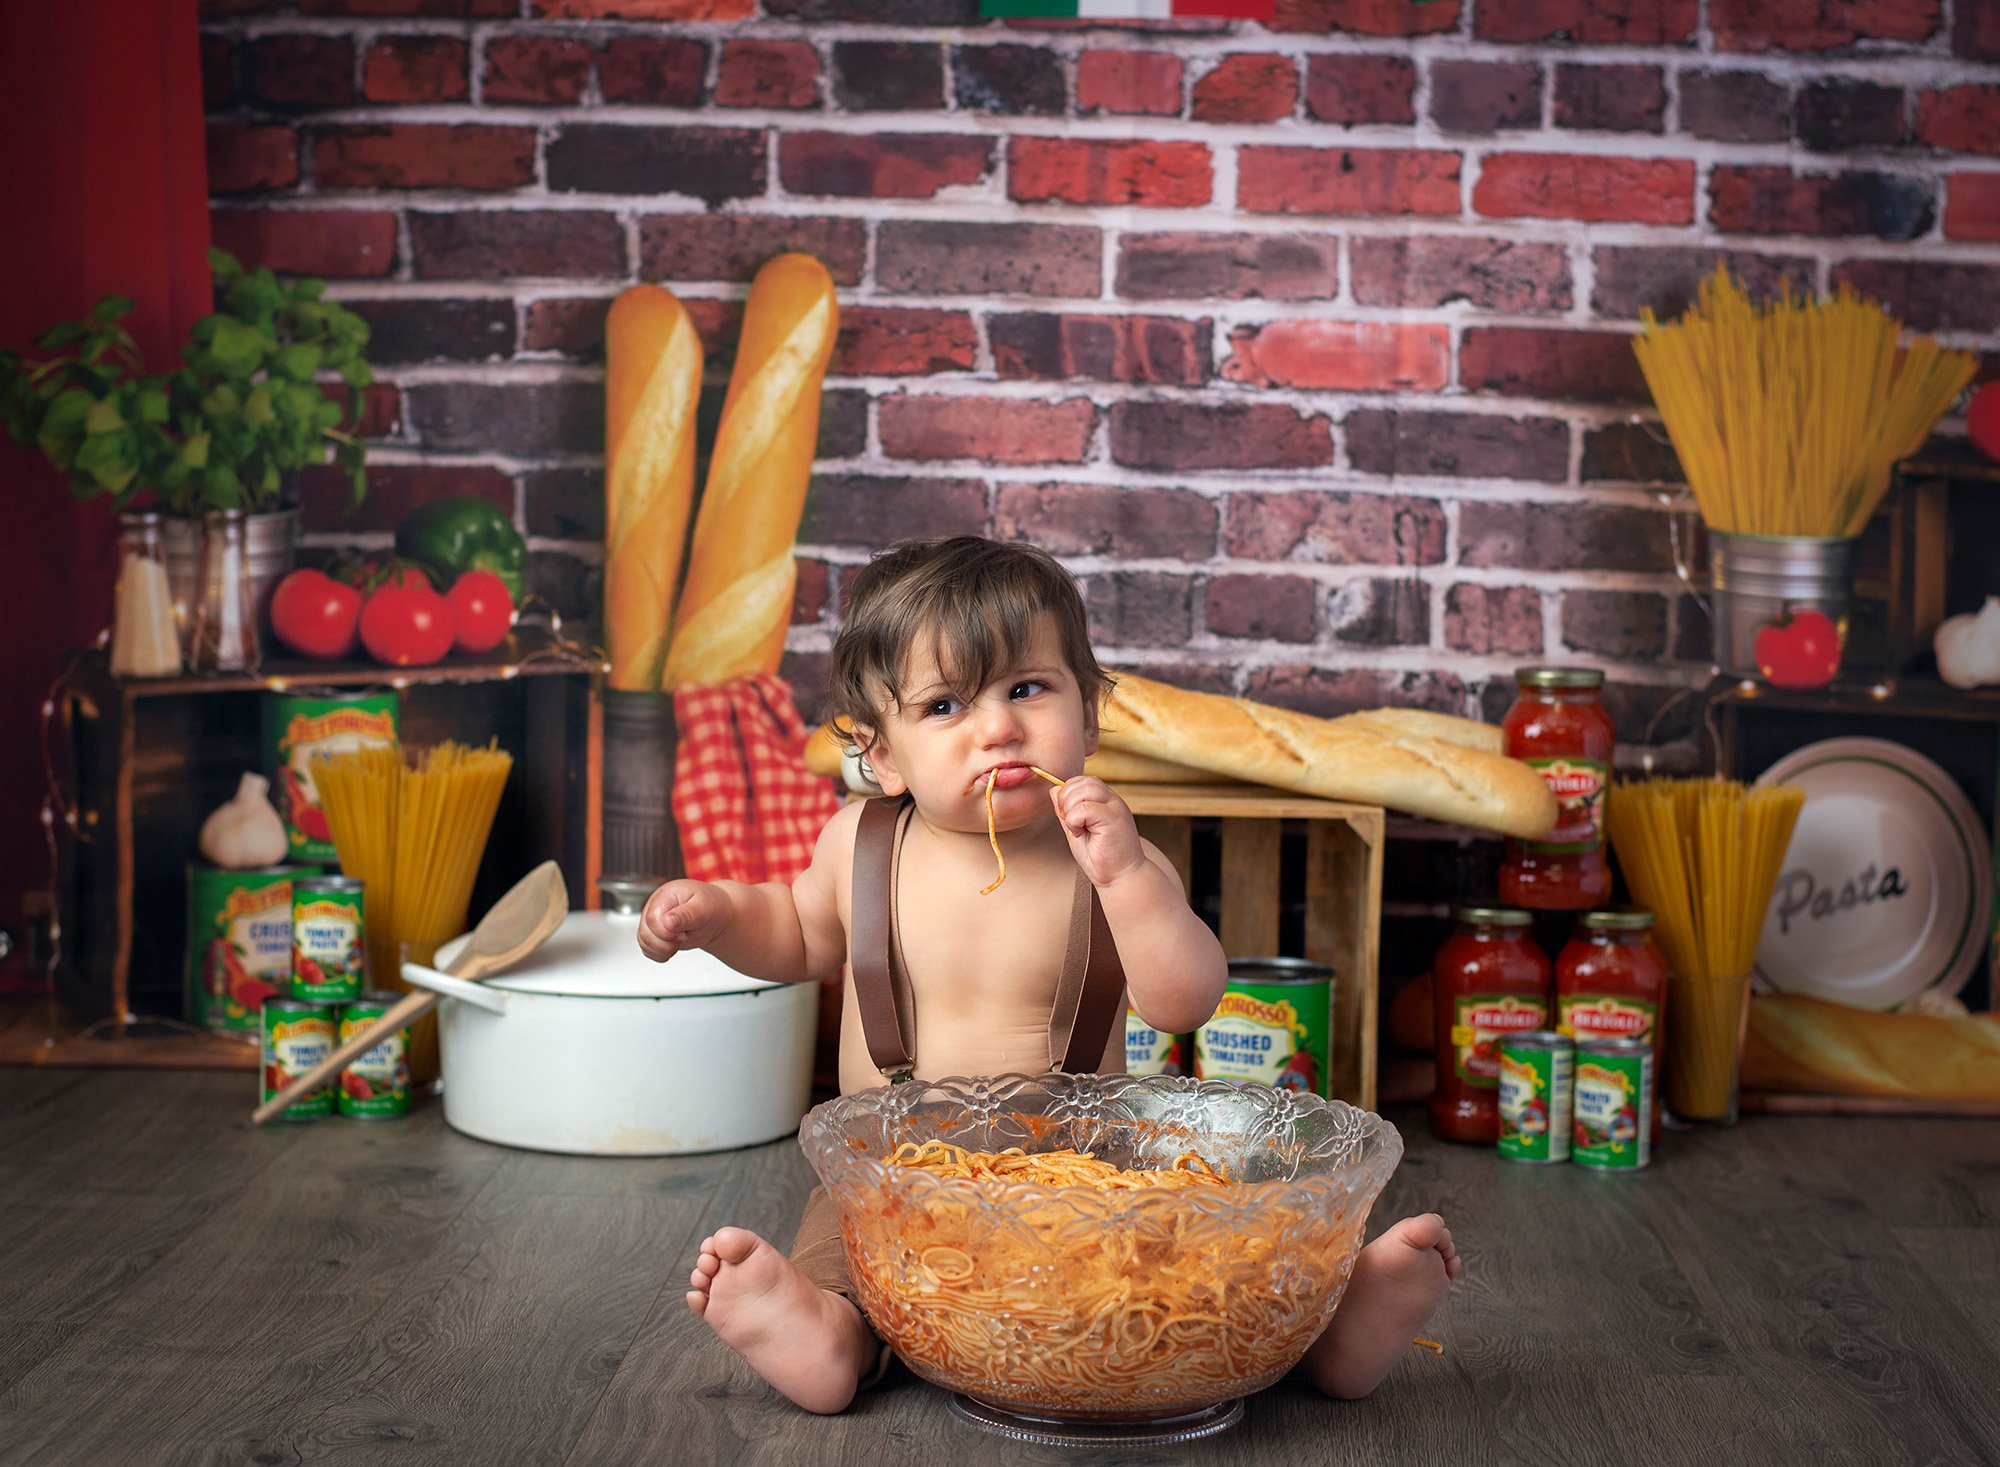 one year old boy eating spaghetti with Italian bread and jars of sauce in background